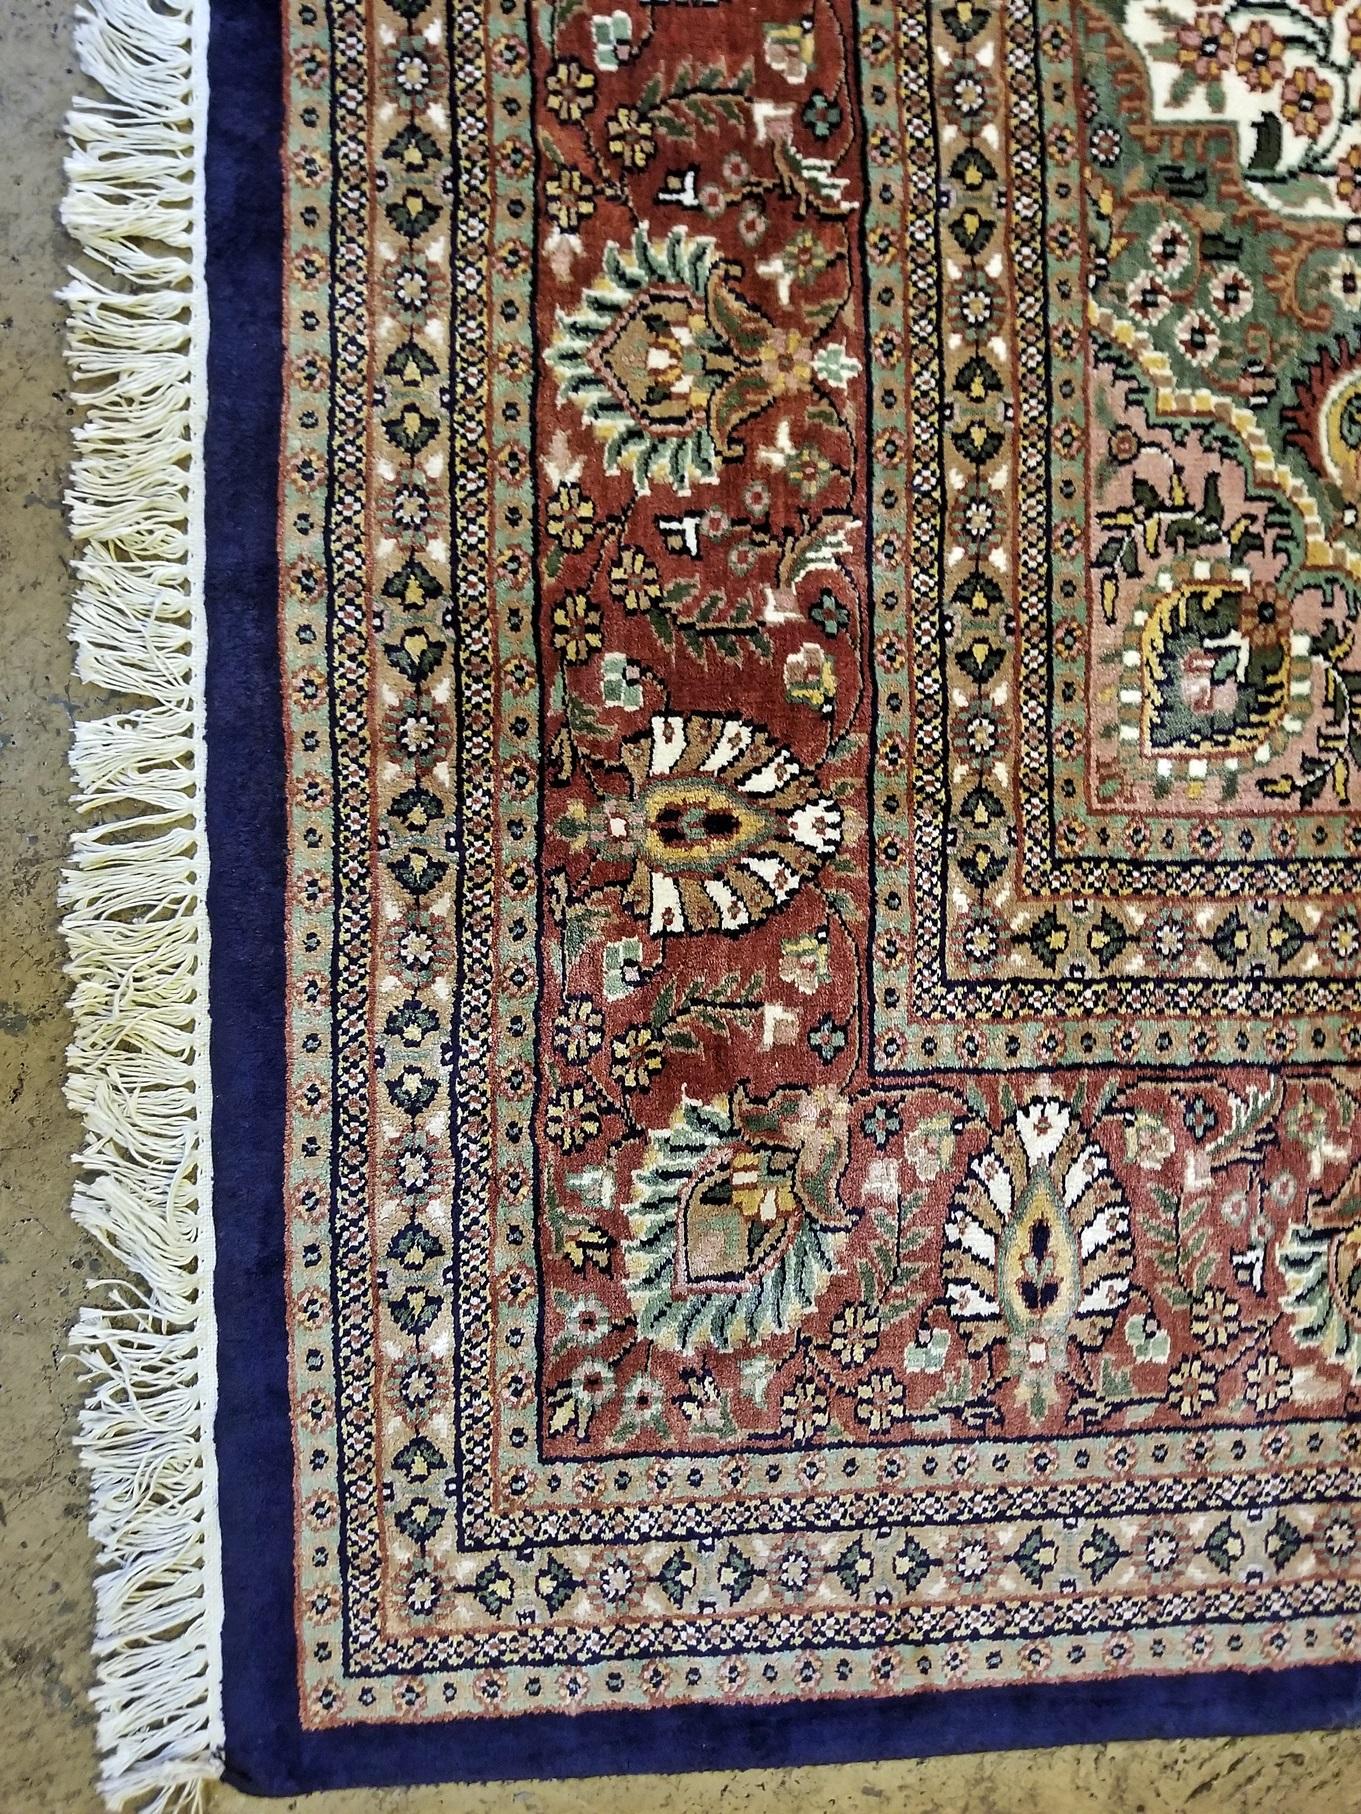 Hand-Woven Large Indian Kashmir Silk Area Rug, Sapphire Blue, Green, Brown and Cream